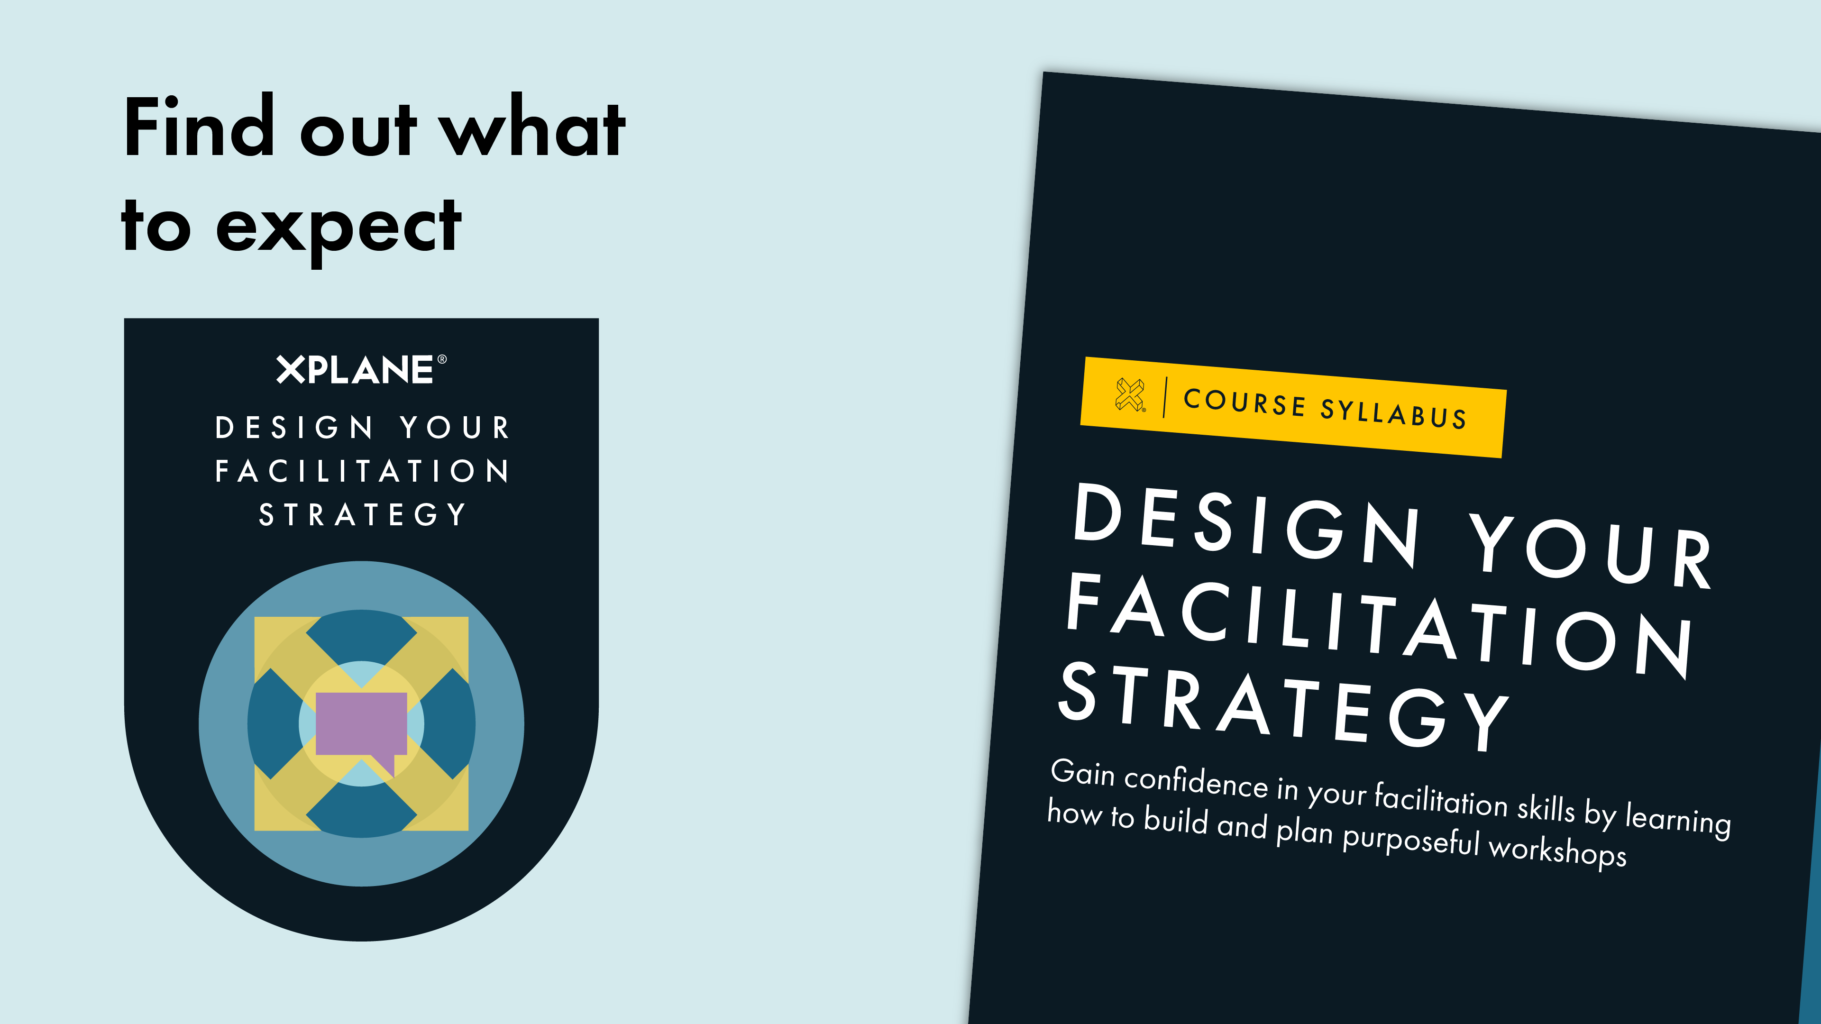 Image of the Design Your Facilitation Strategy course syllabus peeks from the right next to text reading "Find out what to expect" above an image of the Design Your Facilitation Strategy course badge. Against a light blue background.